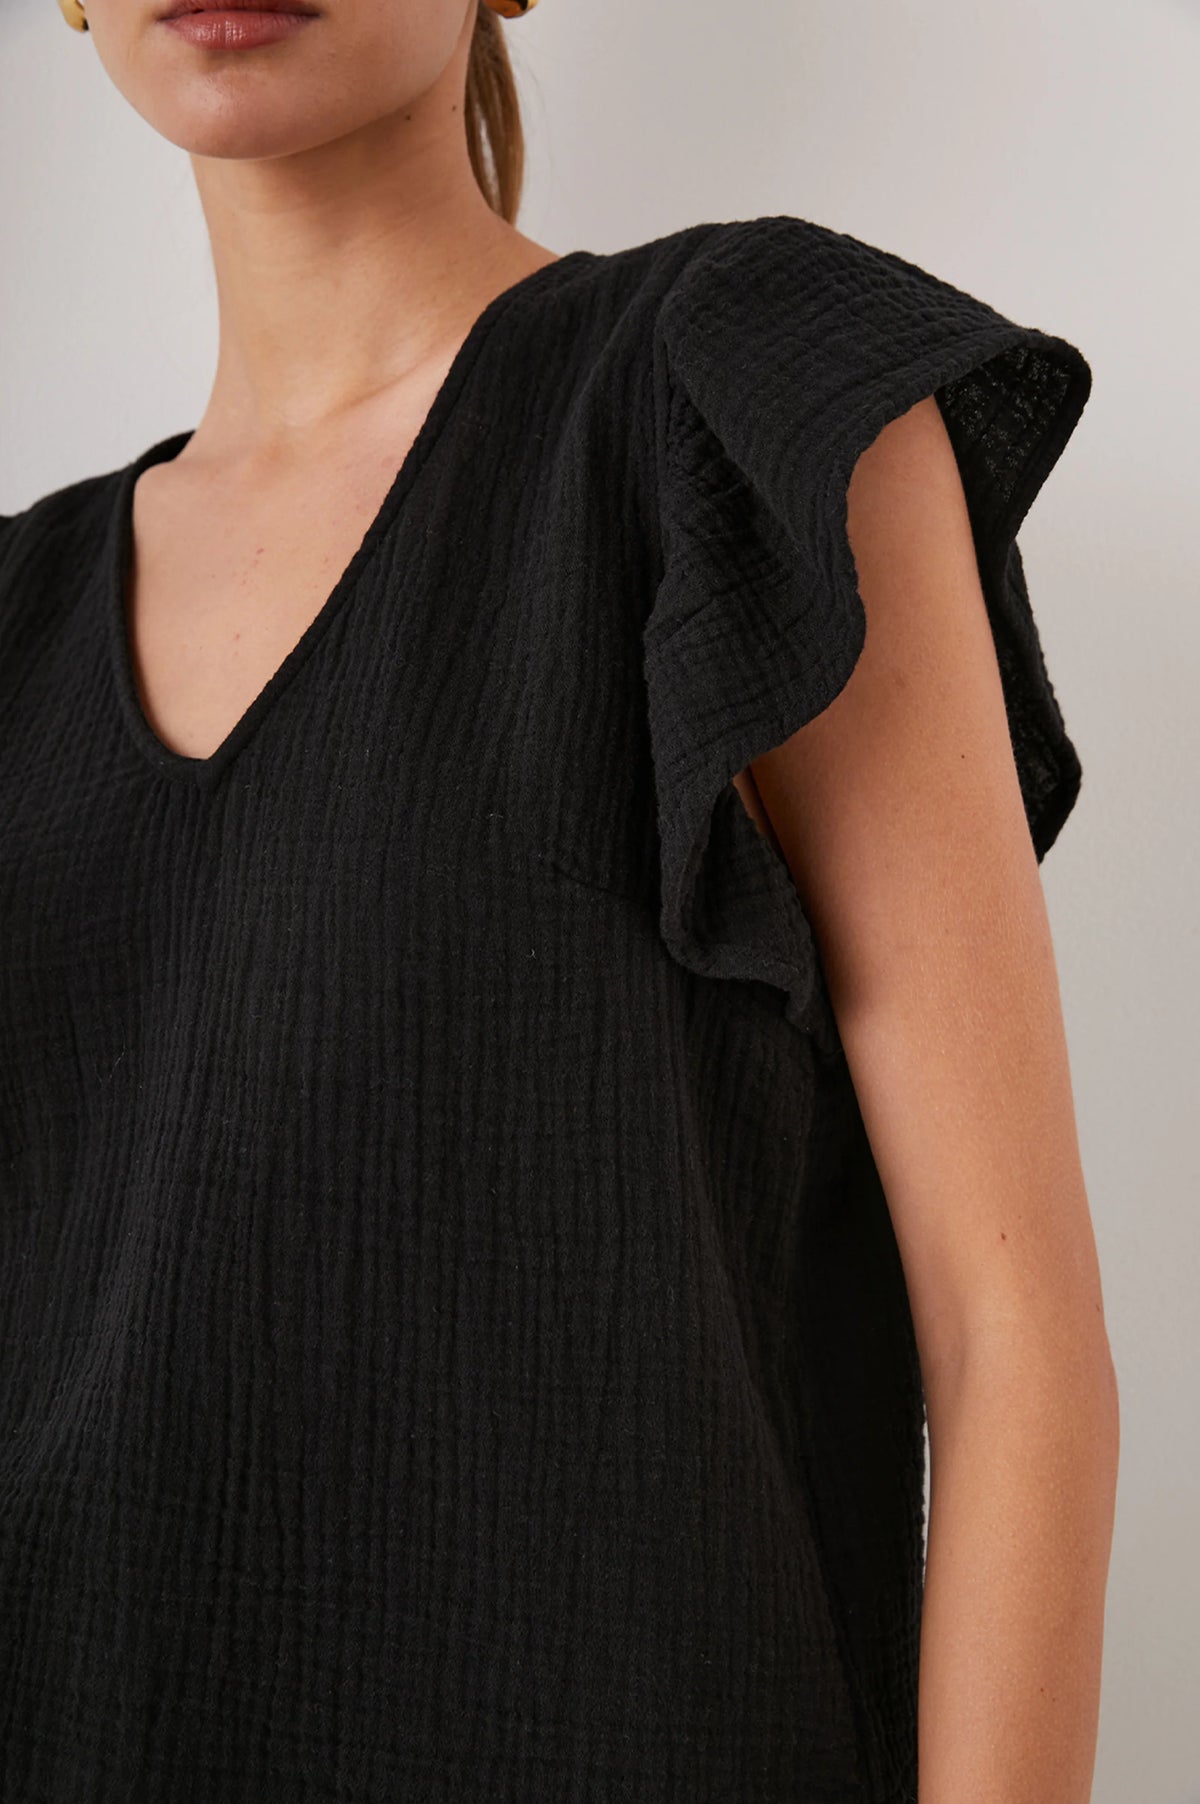 Black V neck cheese-cloth top with short ruffle sleeves